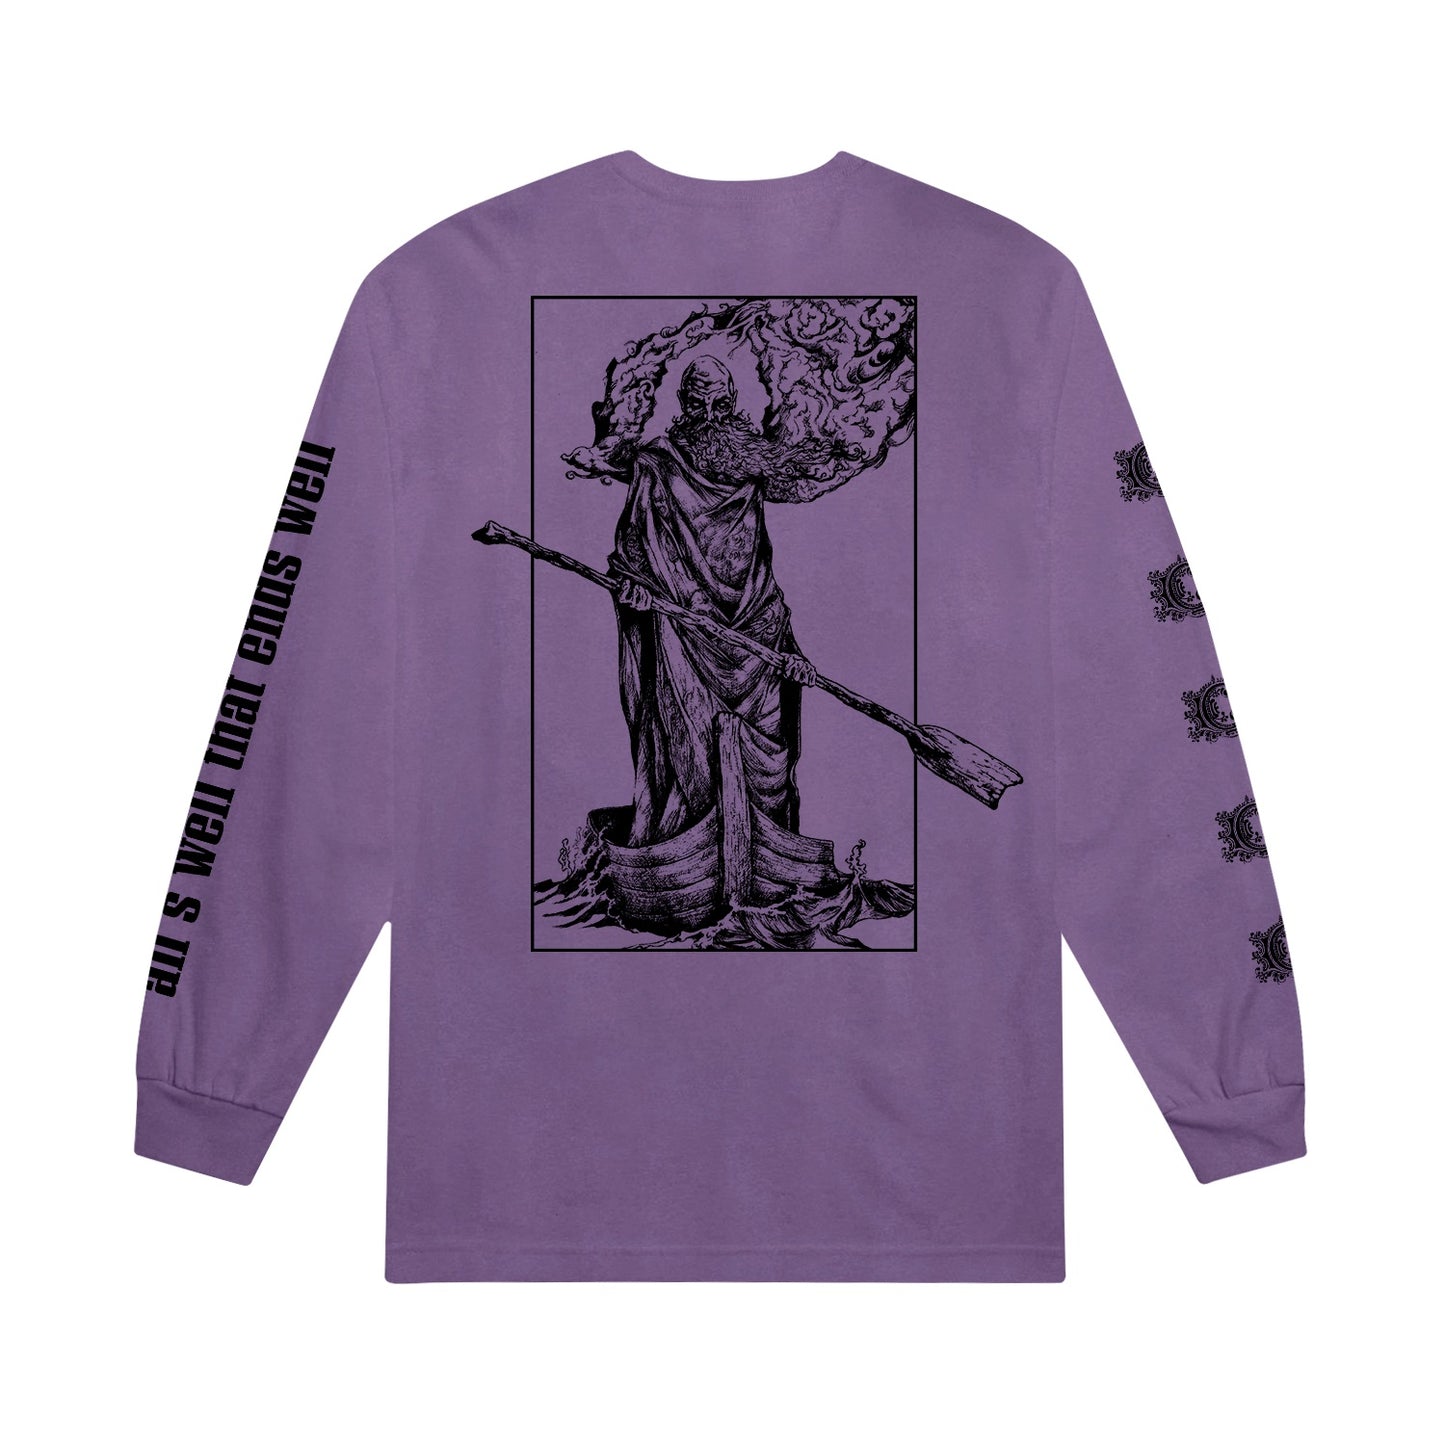 image of the back of a violet long sleeve tee shirt. there is a full print in black of bearded man in a cloak standing in a boat with an oar. 